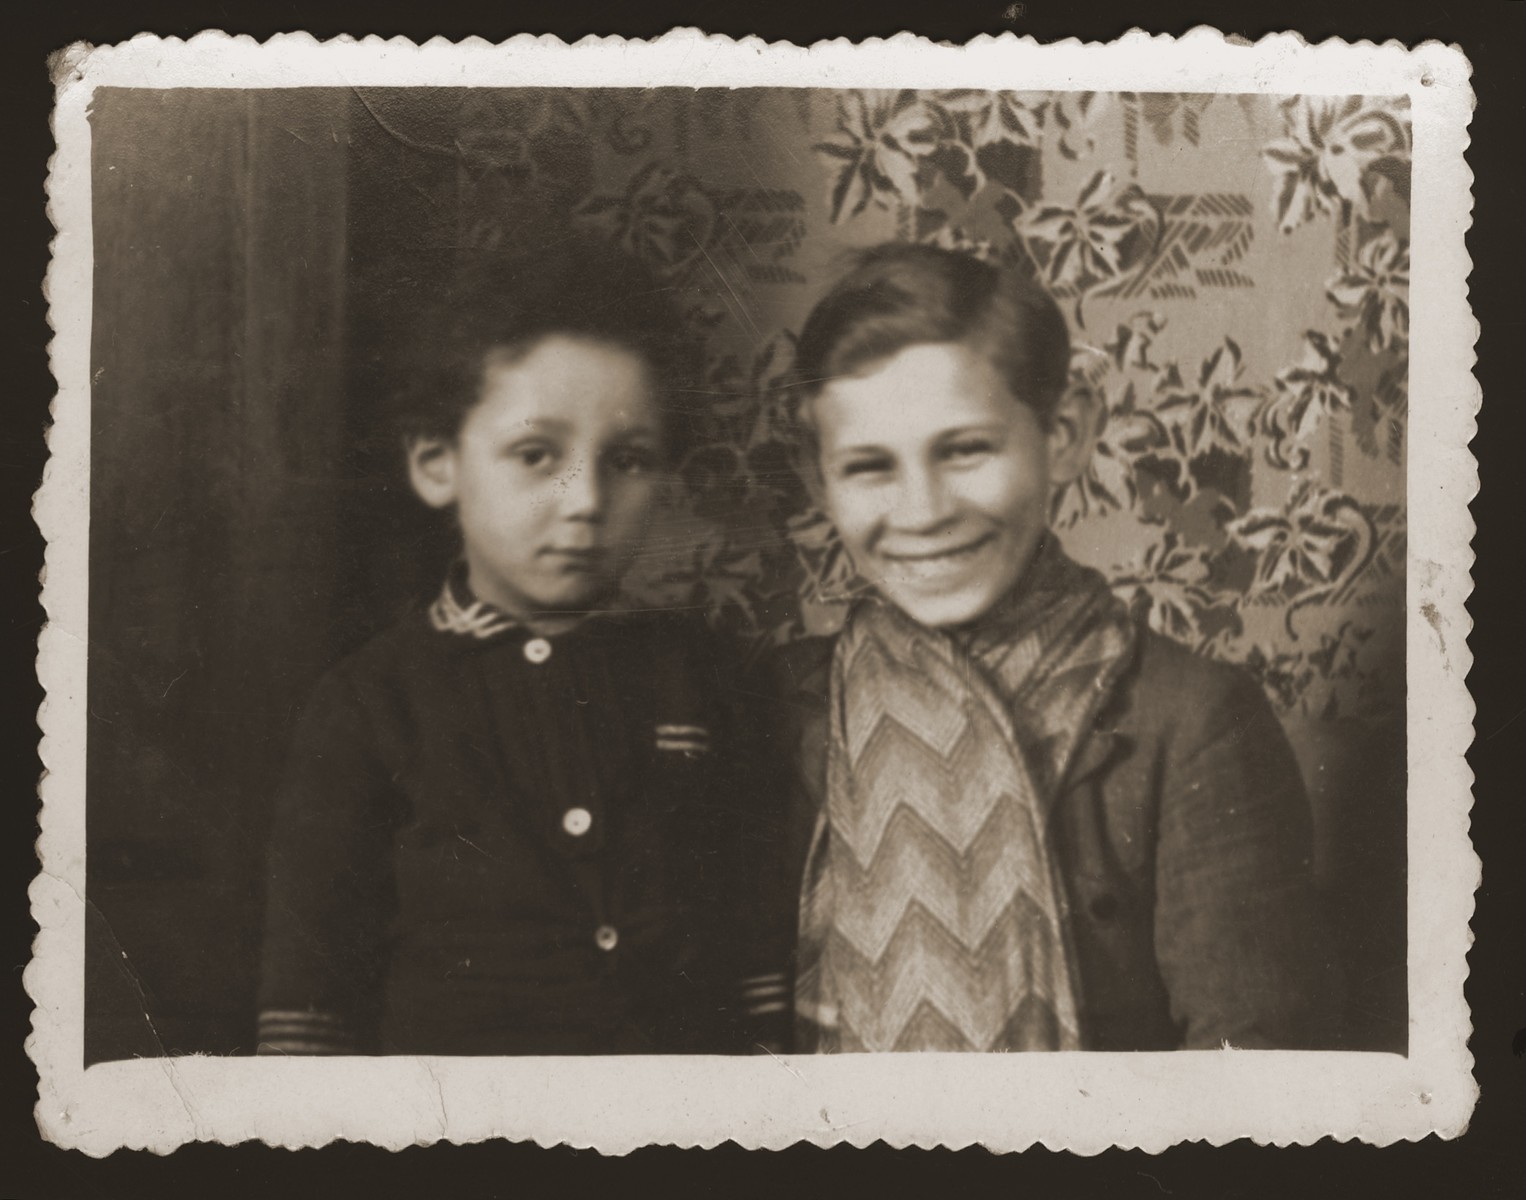 Portrait of two young Jewish boys in Chelm.

Pictured are Mojszale Nissenbaum (left) and ? Schumacher, cousins of Estera Ajzen, who were later killed in Chelmno.